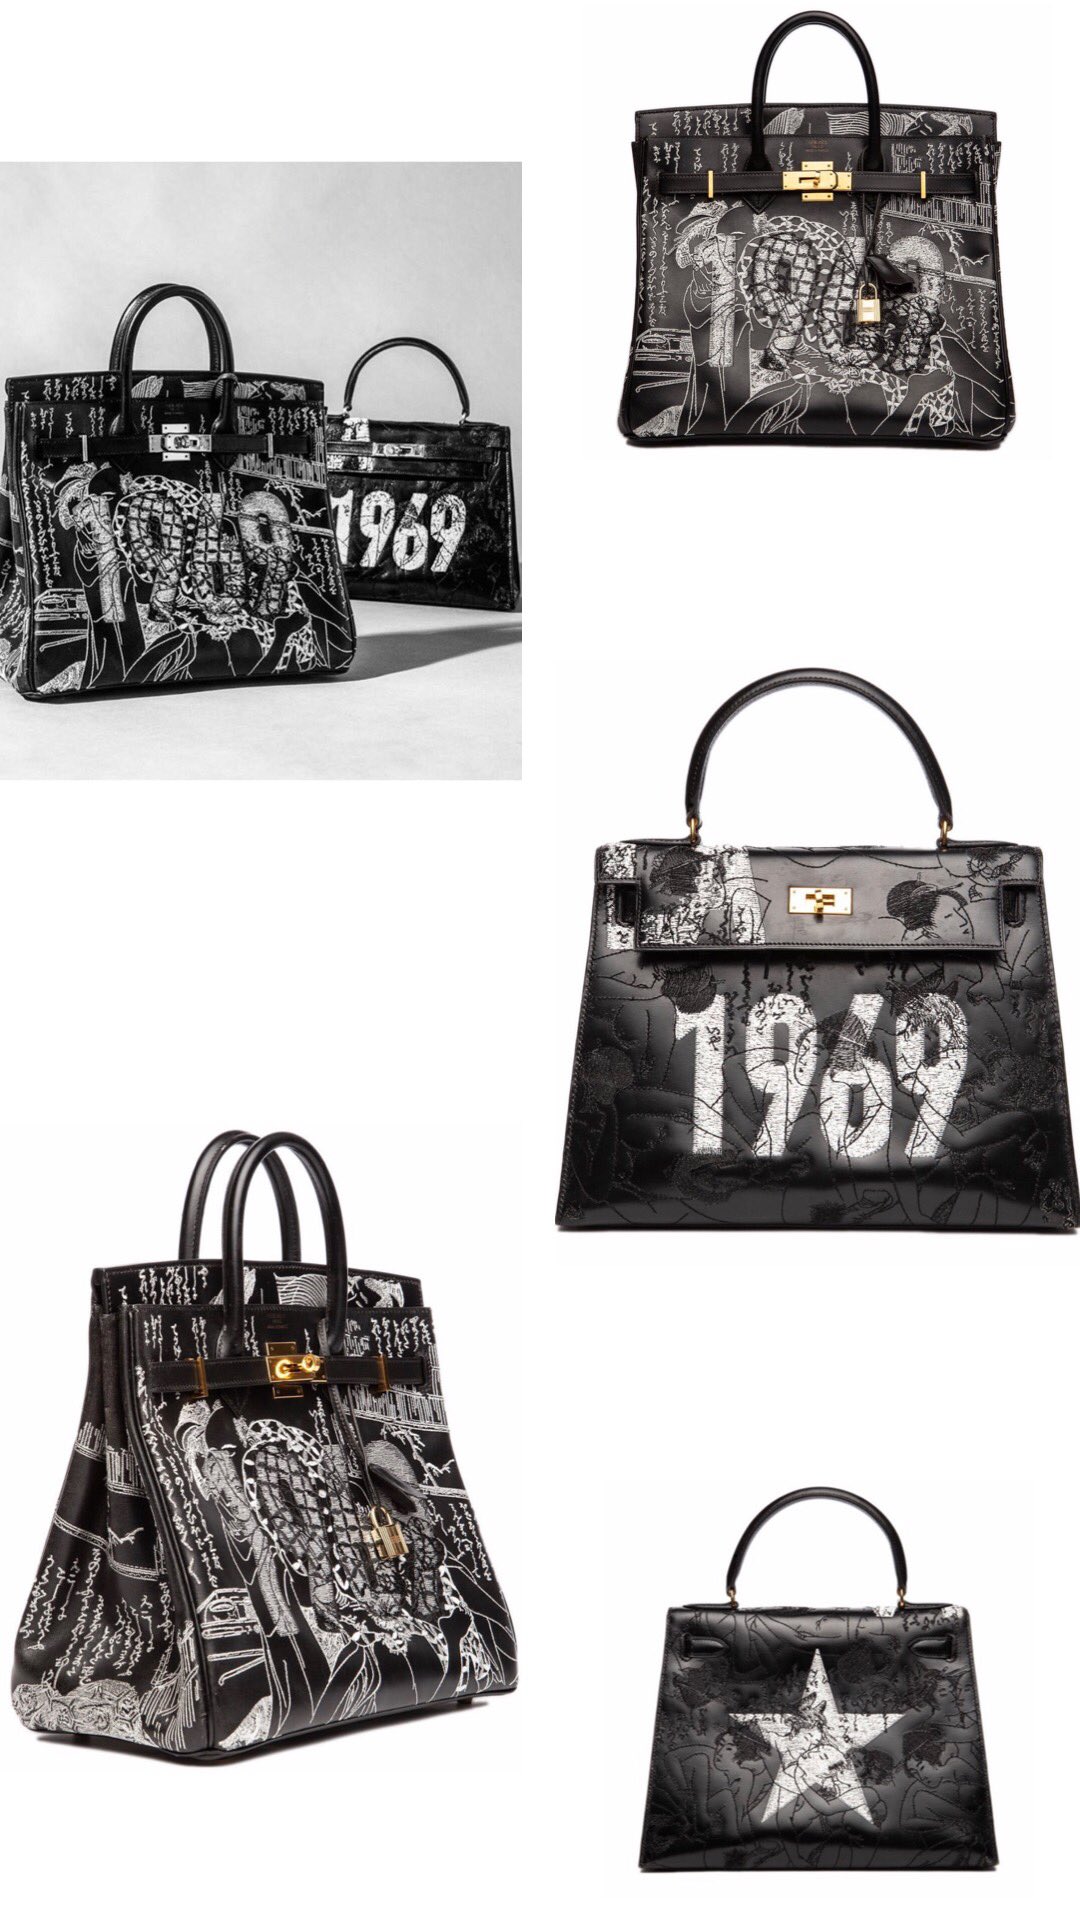 XMF on Twitter: Hermes Birkin x Jay Ahr “From 1969 to 2020